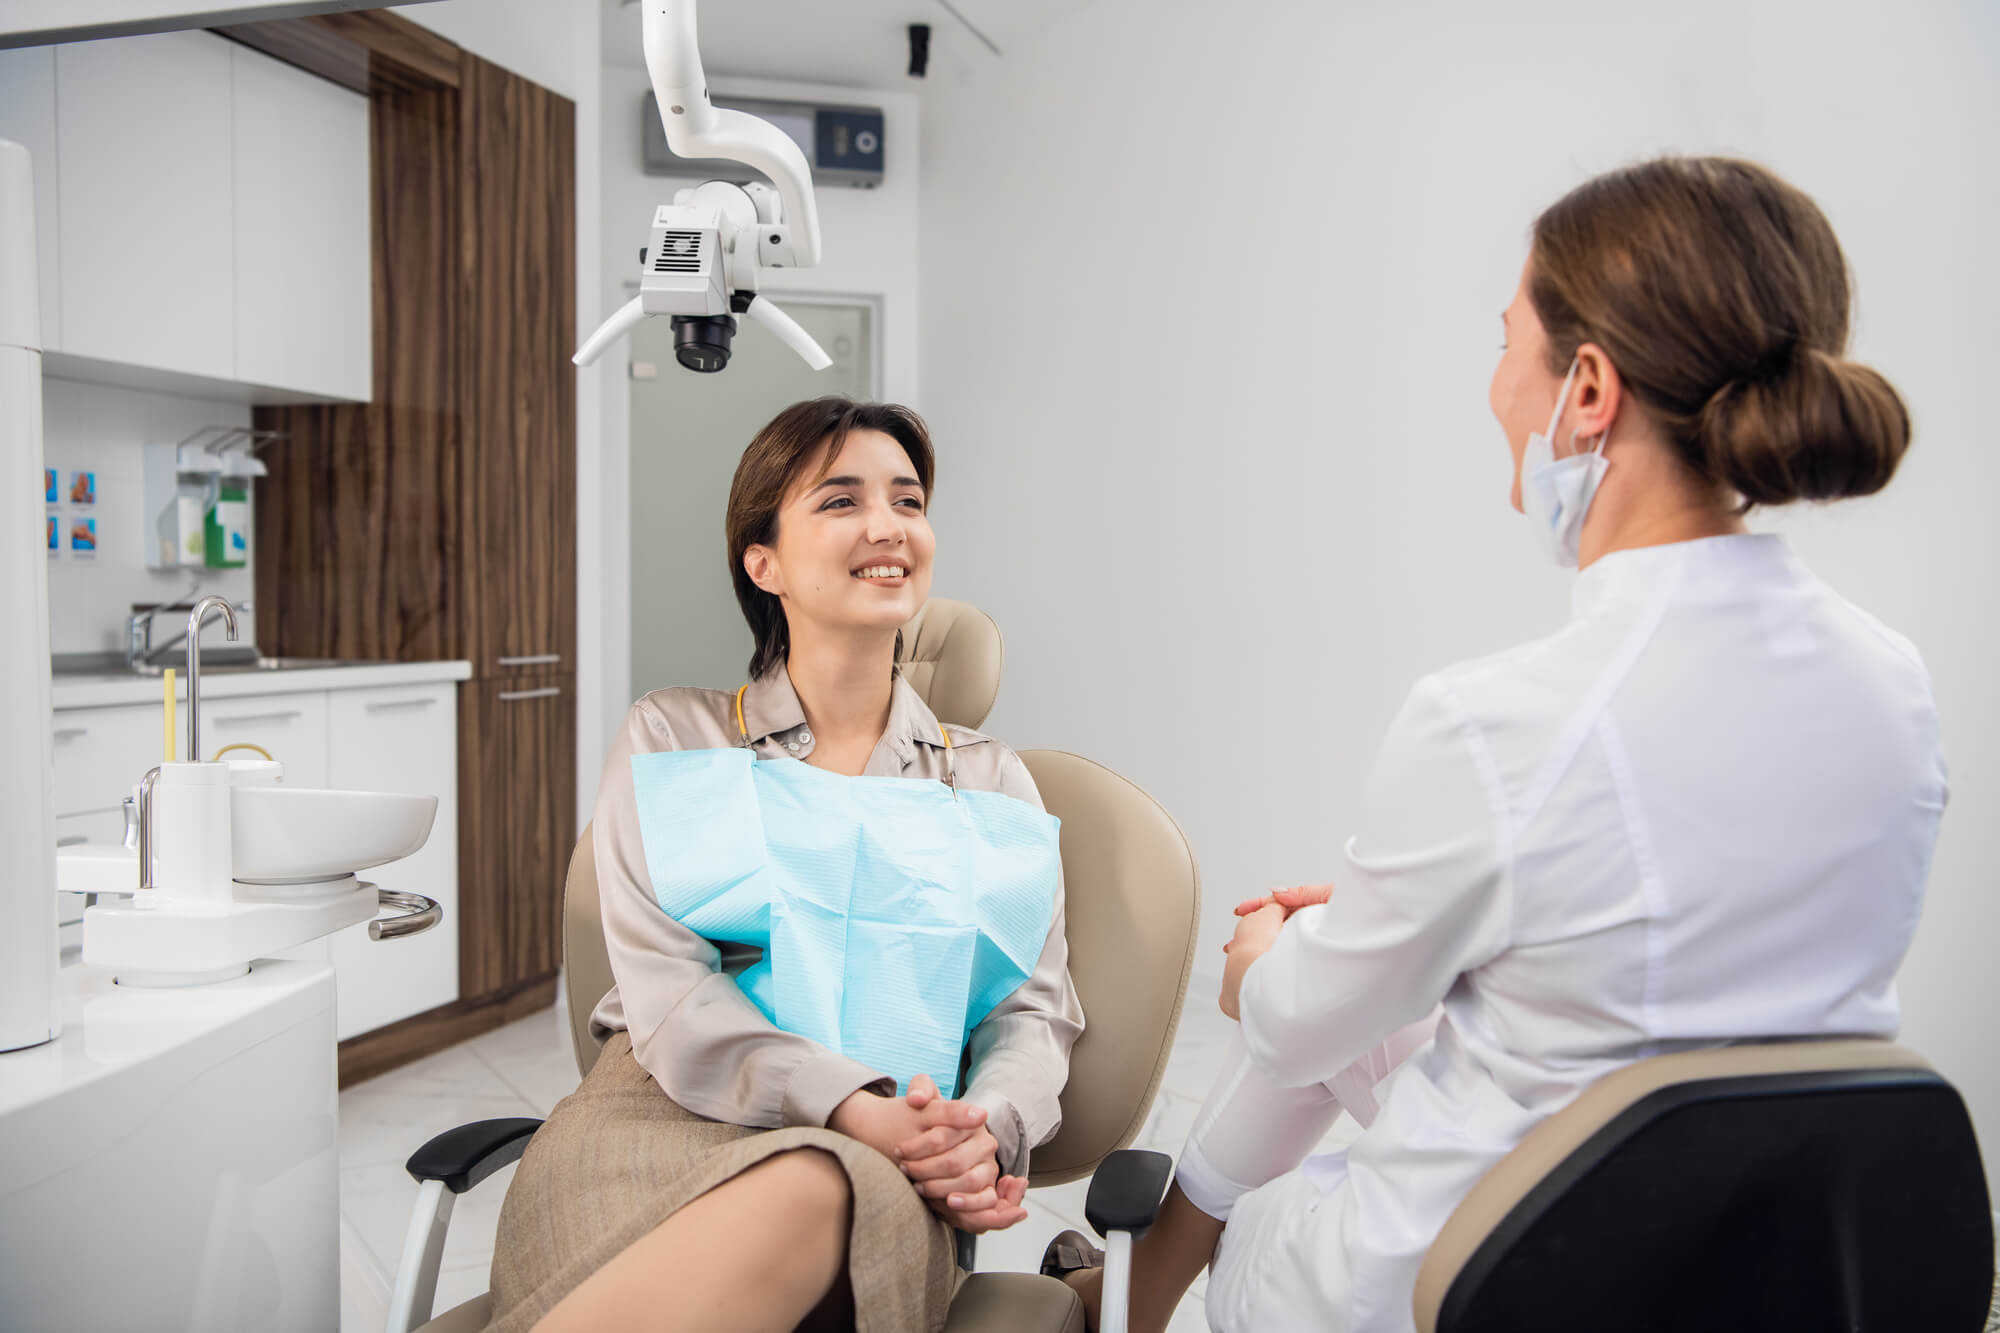 A woman at the dentists office chatting to her doctor and smiling with a toothy smile